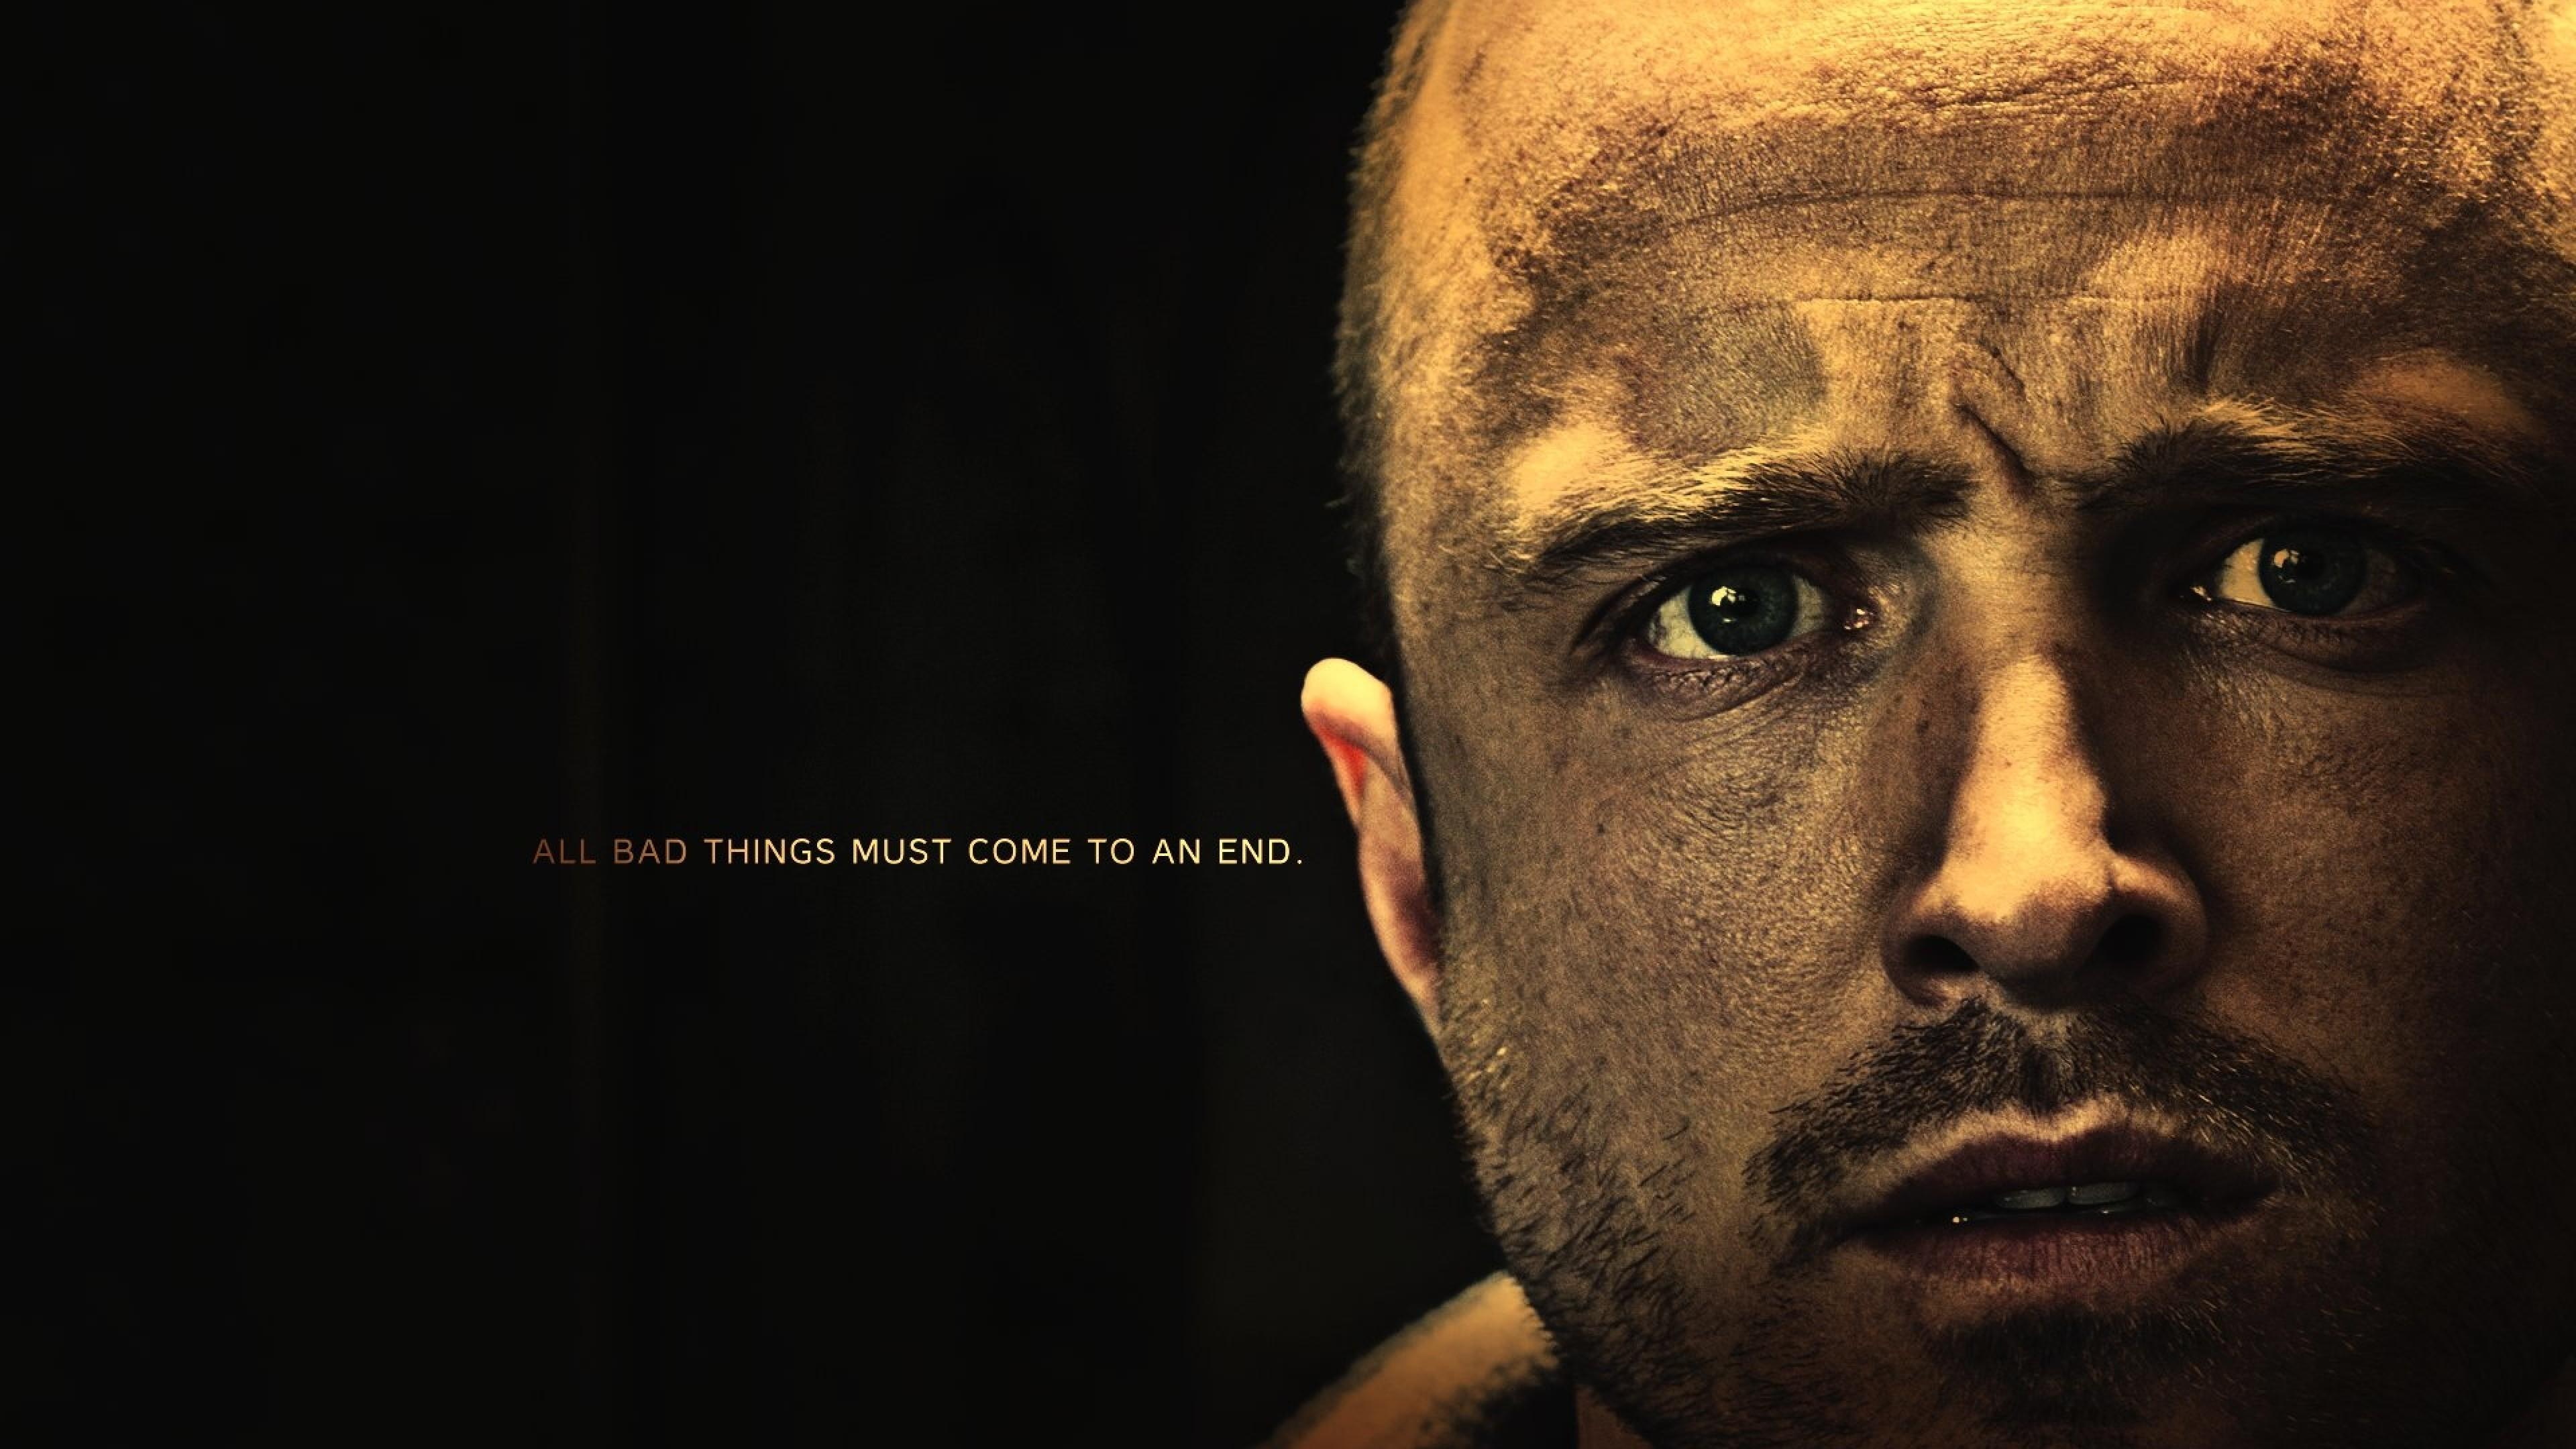 Download 3840x2160 Jesse Pinkman, All Bad Things Must Come To An End